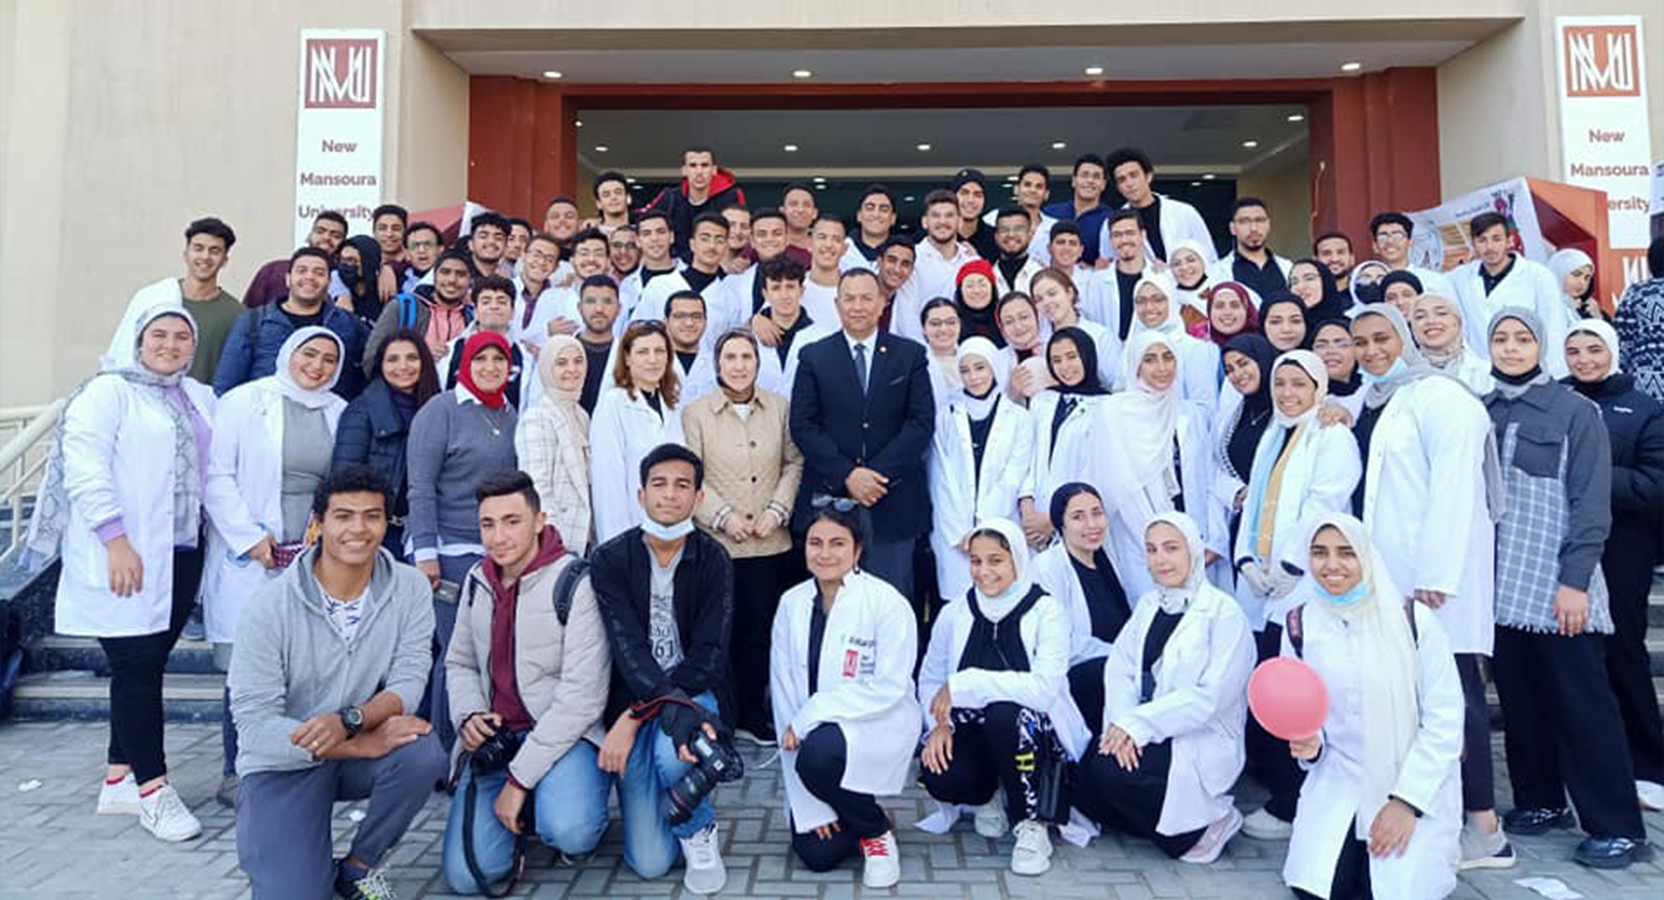 New Mansoura Medicine organizes a campaign to raise awareness of the problems of obesity